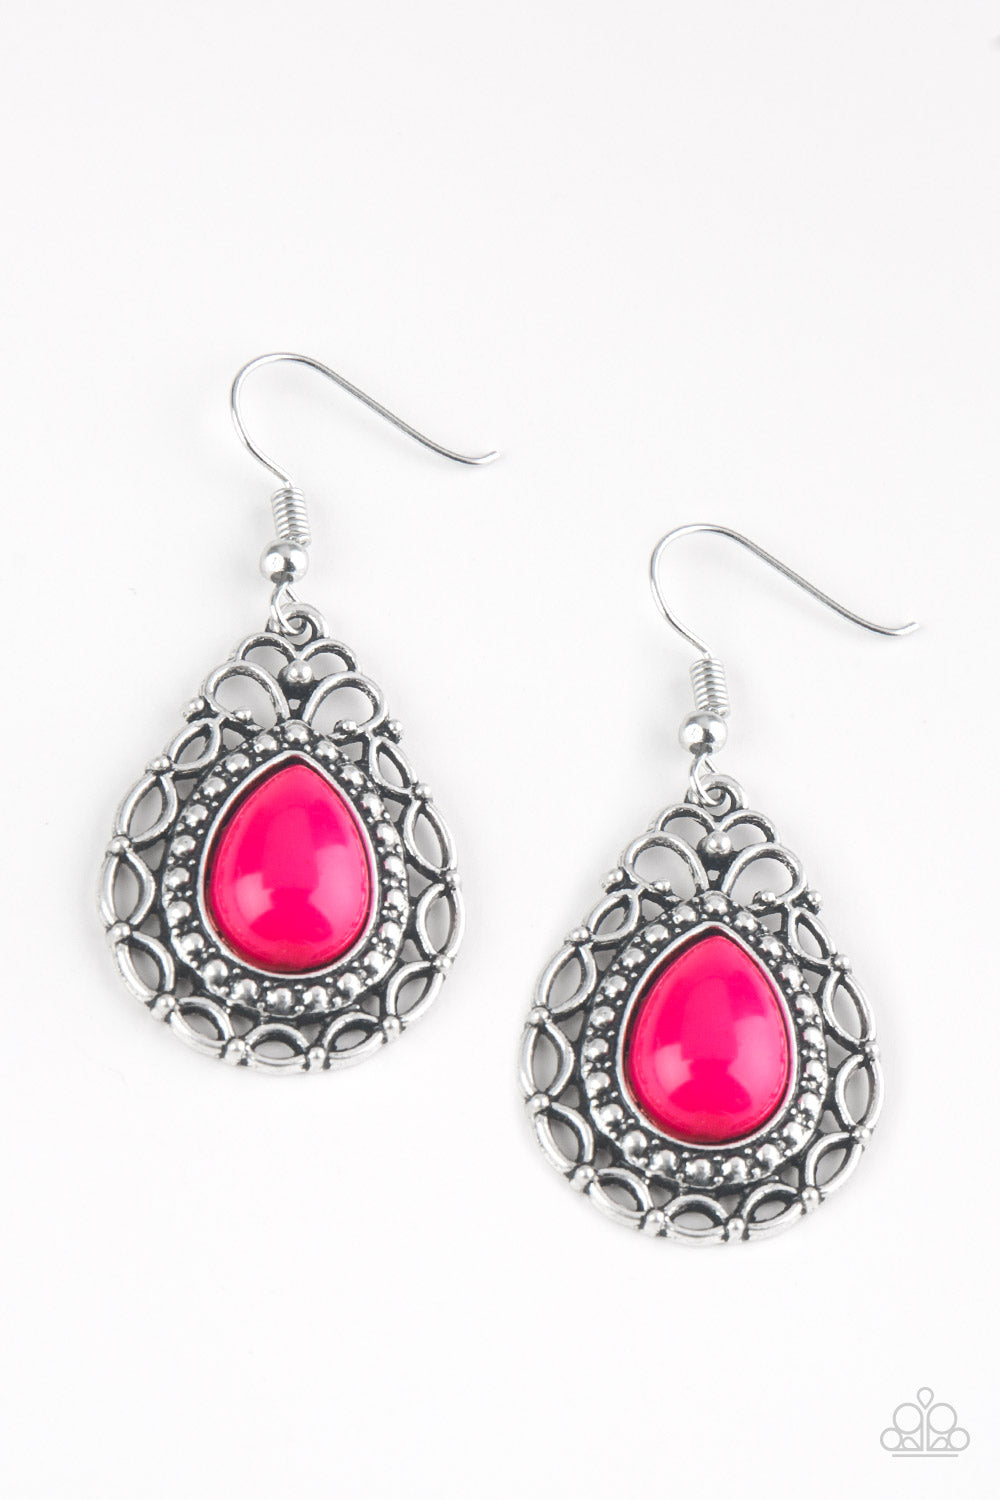 A pink teardrop bead is pressed into a shimmery silver frame radiating with whimsical filigree and studded patterns. Earring attaches to a standard fishhook fitting.